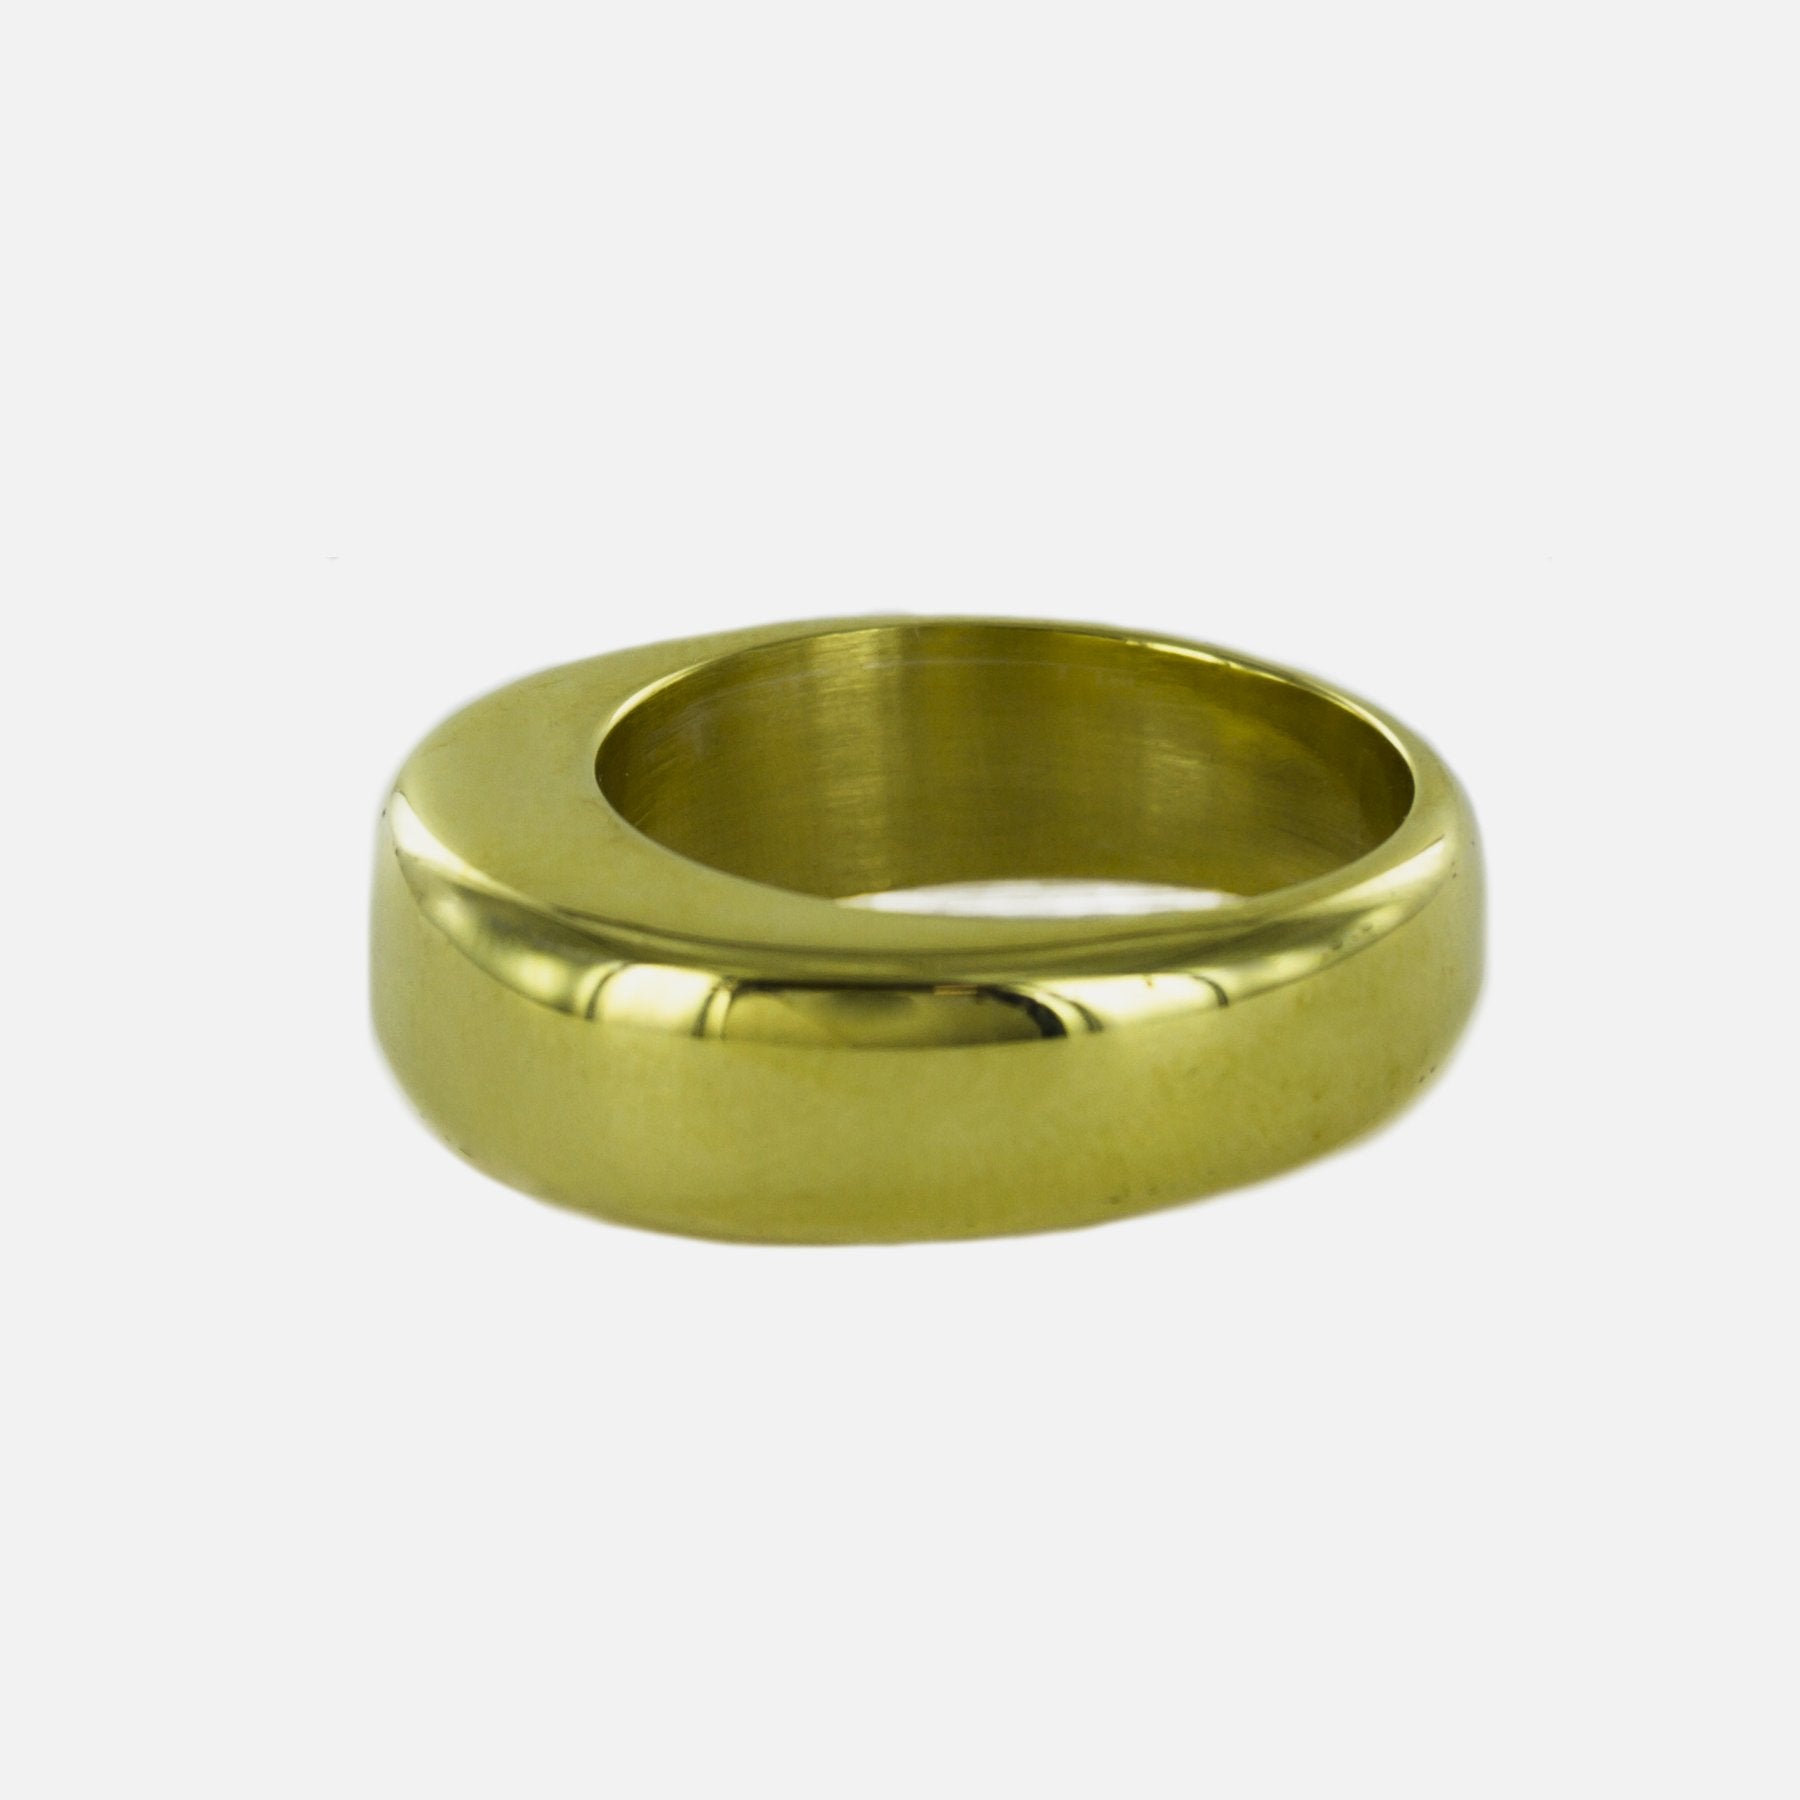 Hollow Brass Ring - Size 9